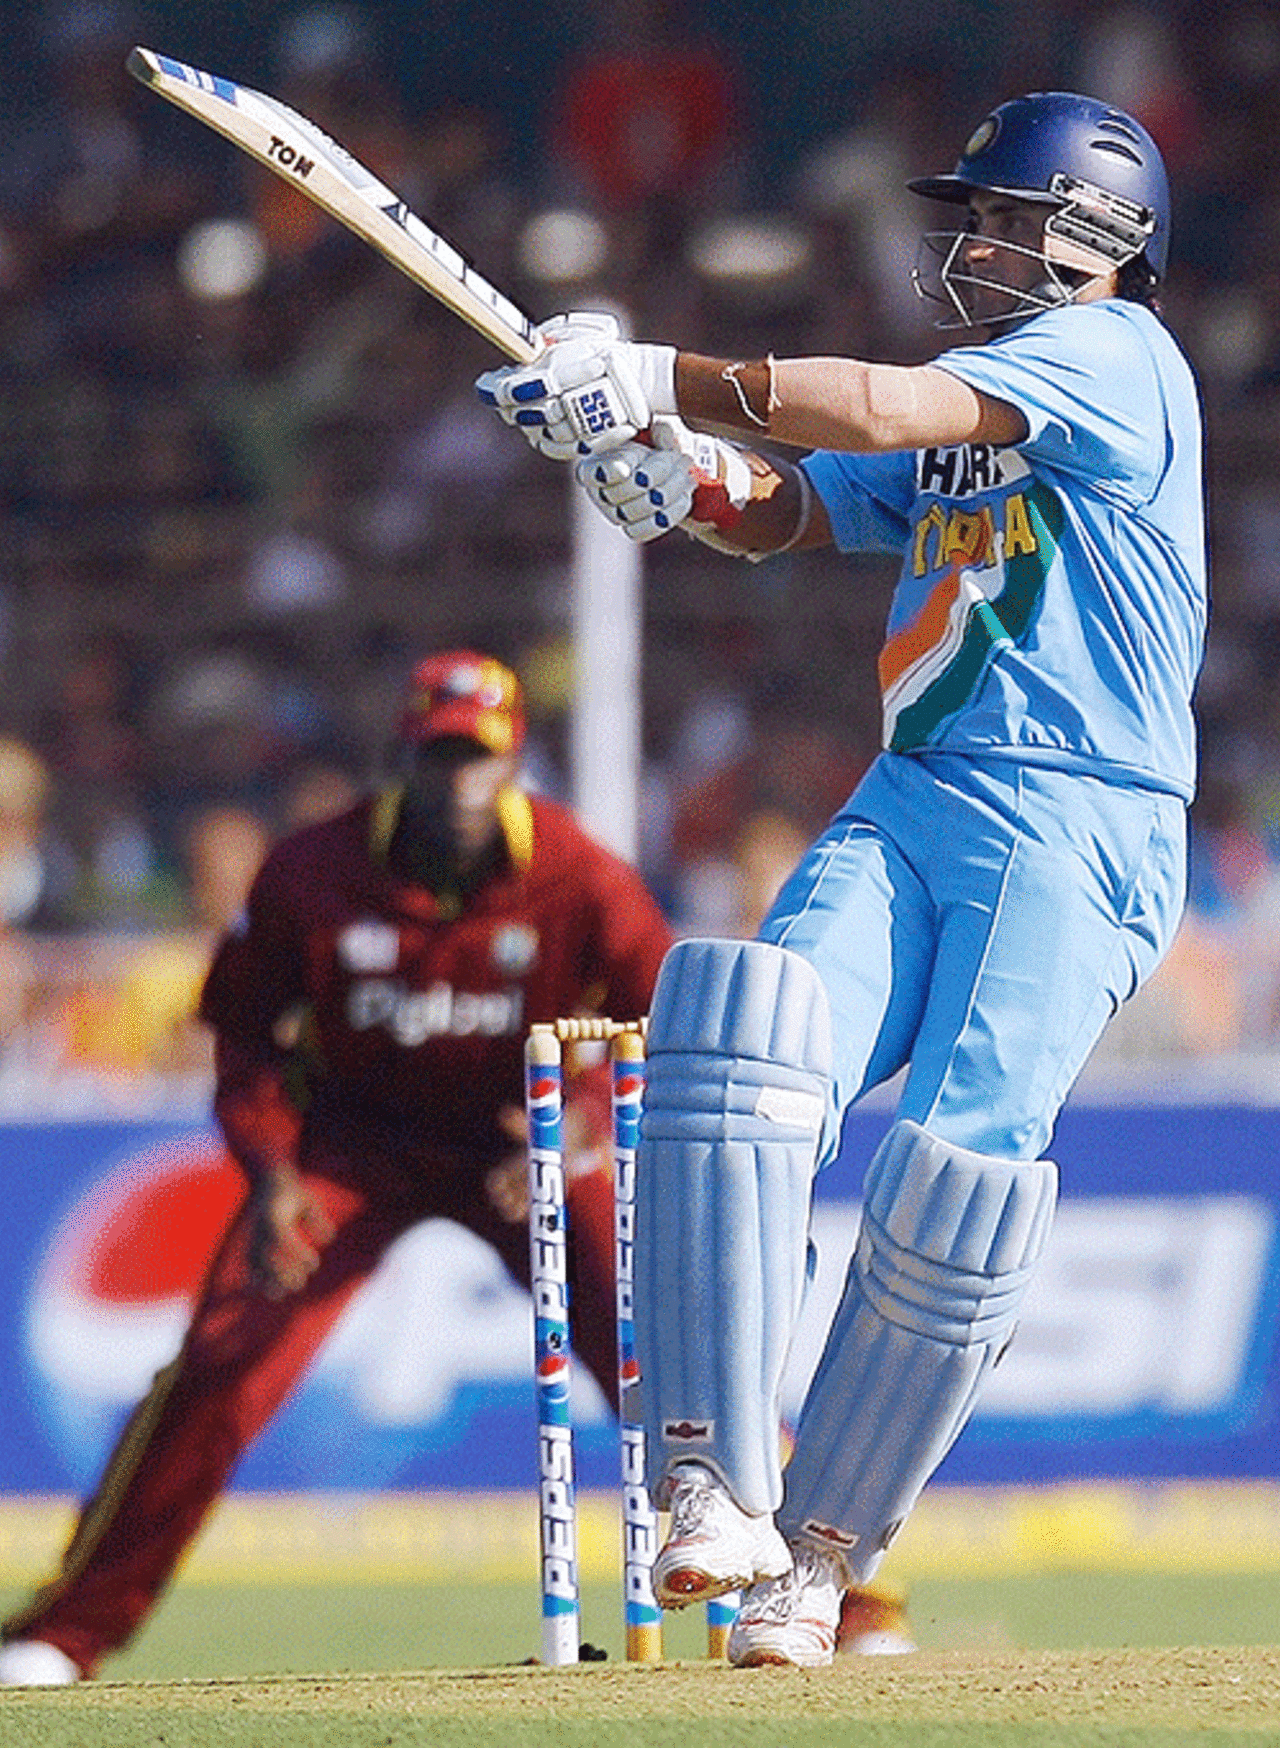 Sourav Ganguly's 82-ball 68 laid the platform for India, India v West Indies, 4th ODI, Vadodara, January 31, 2007